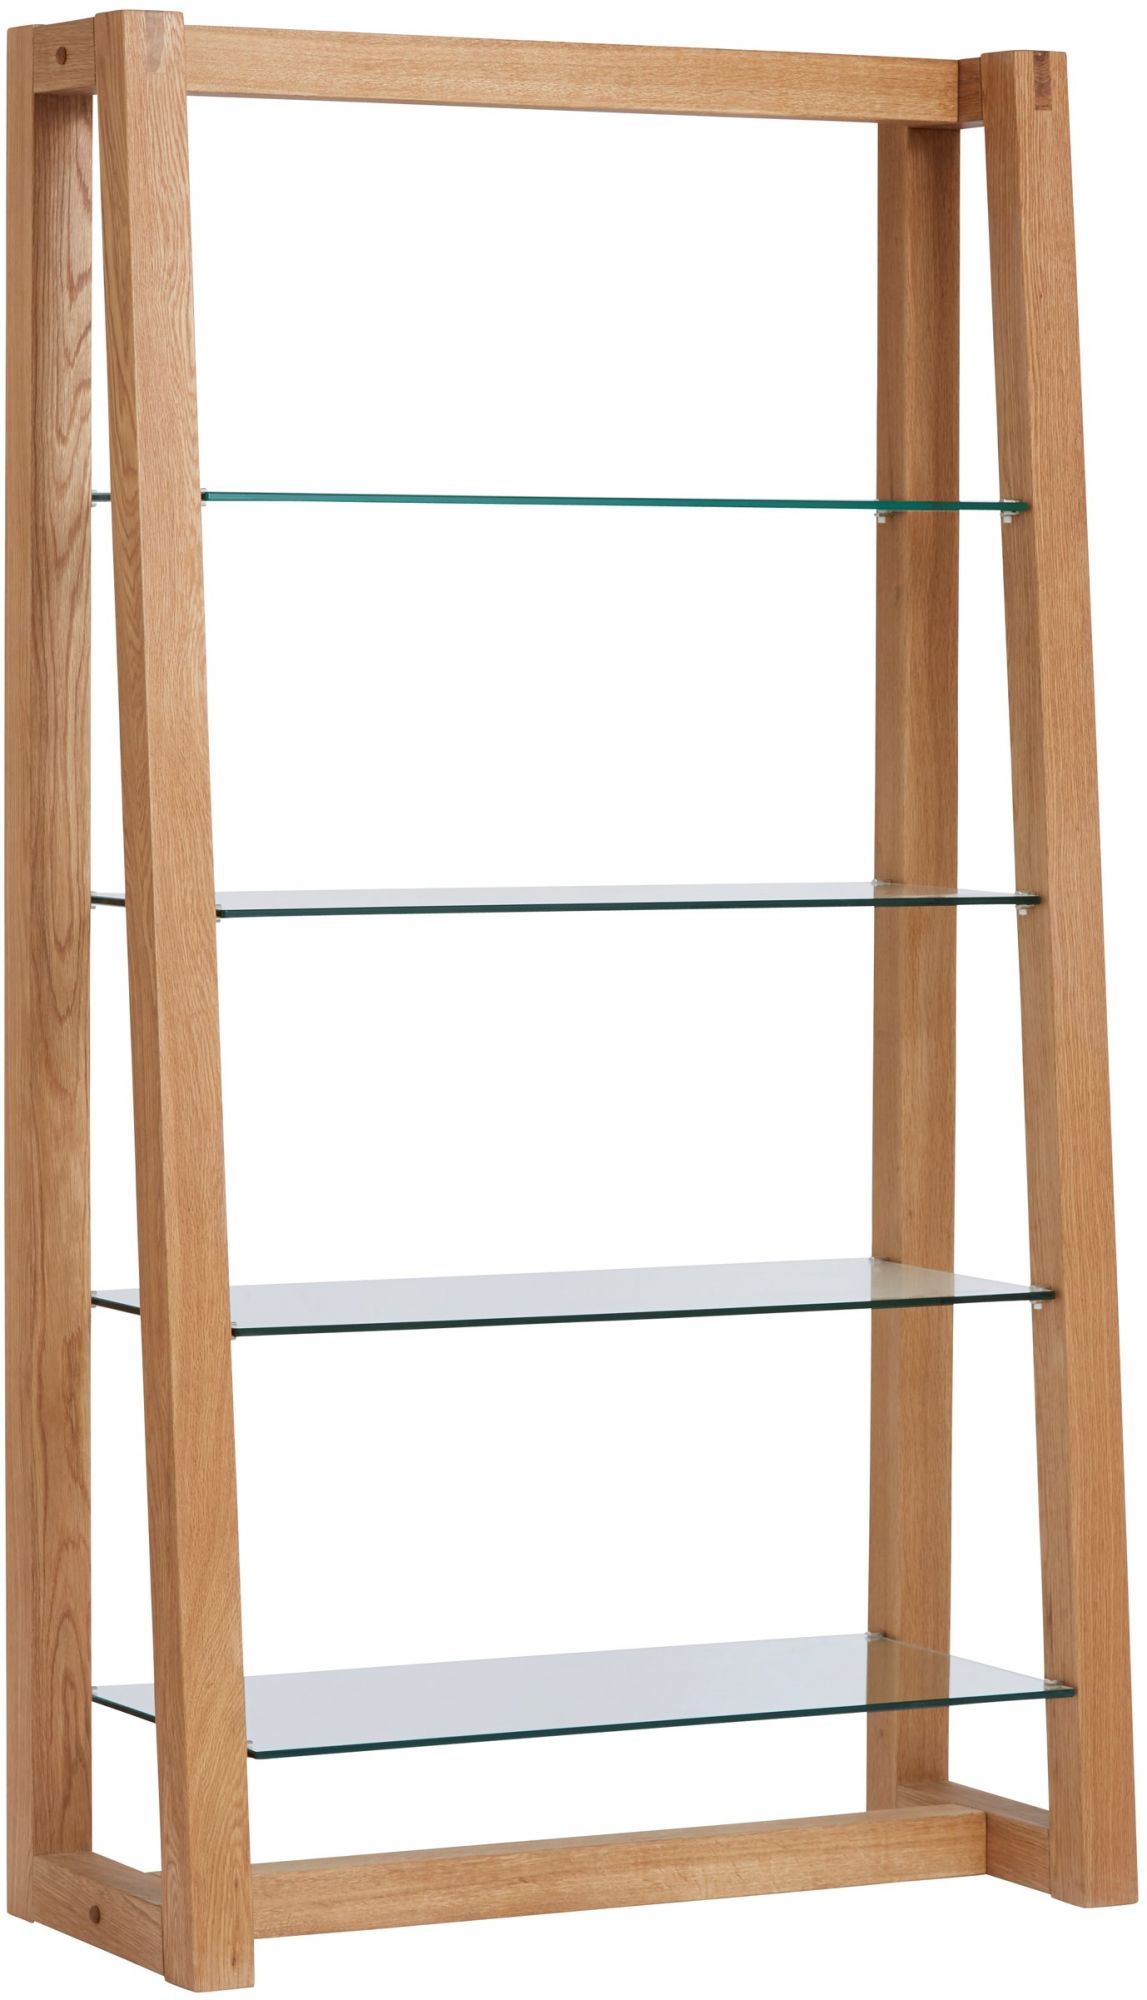 Living Homes Collection Regis Oak, Shelves With Glass